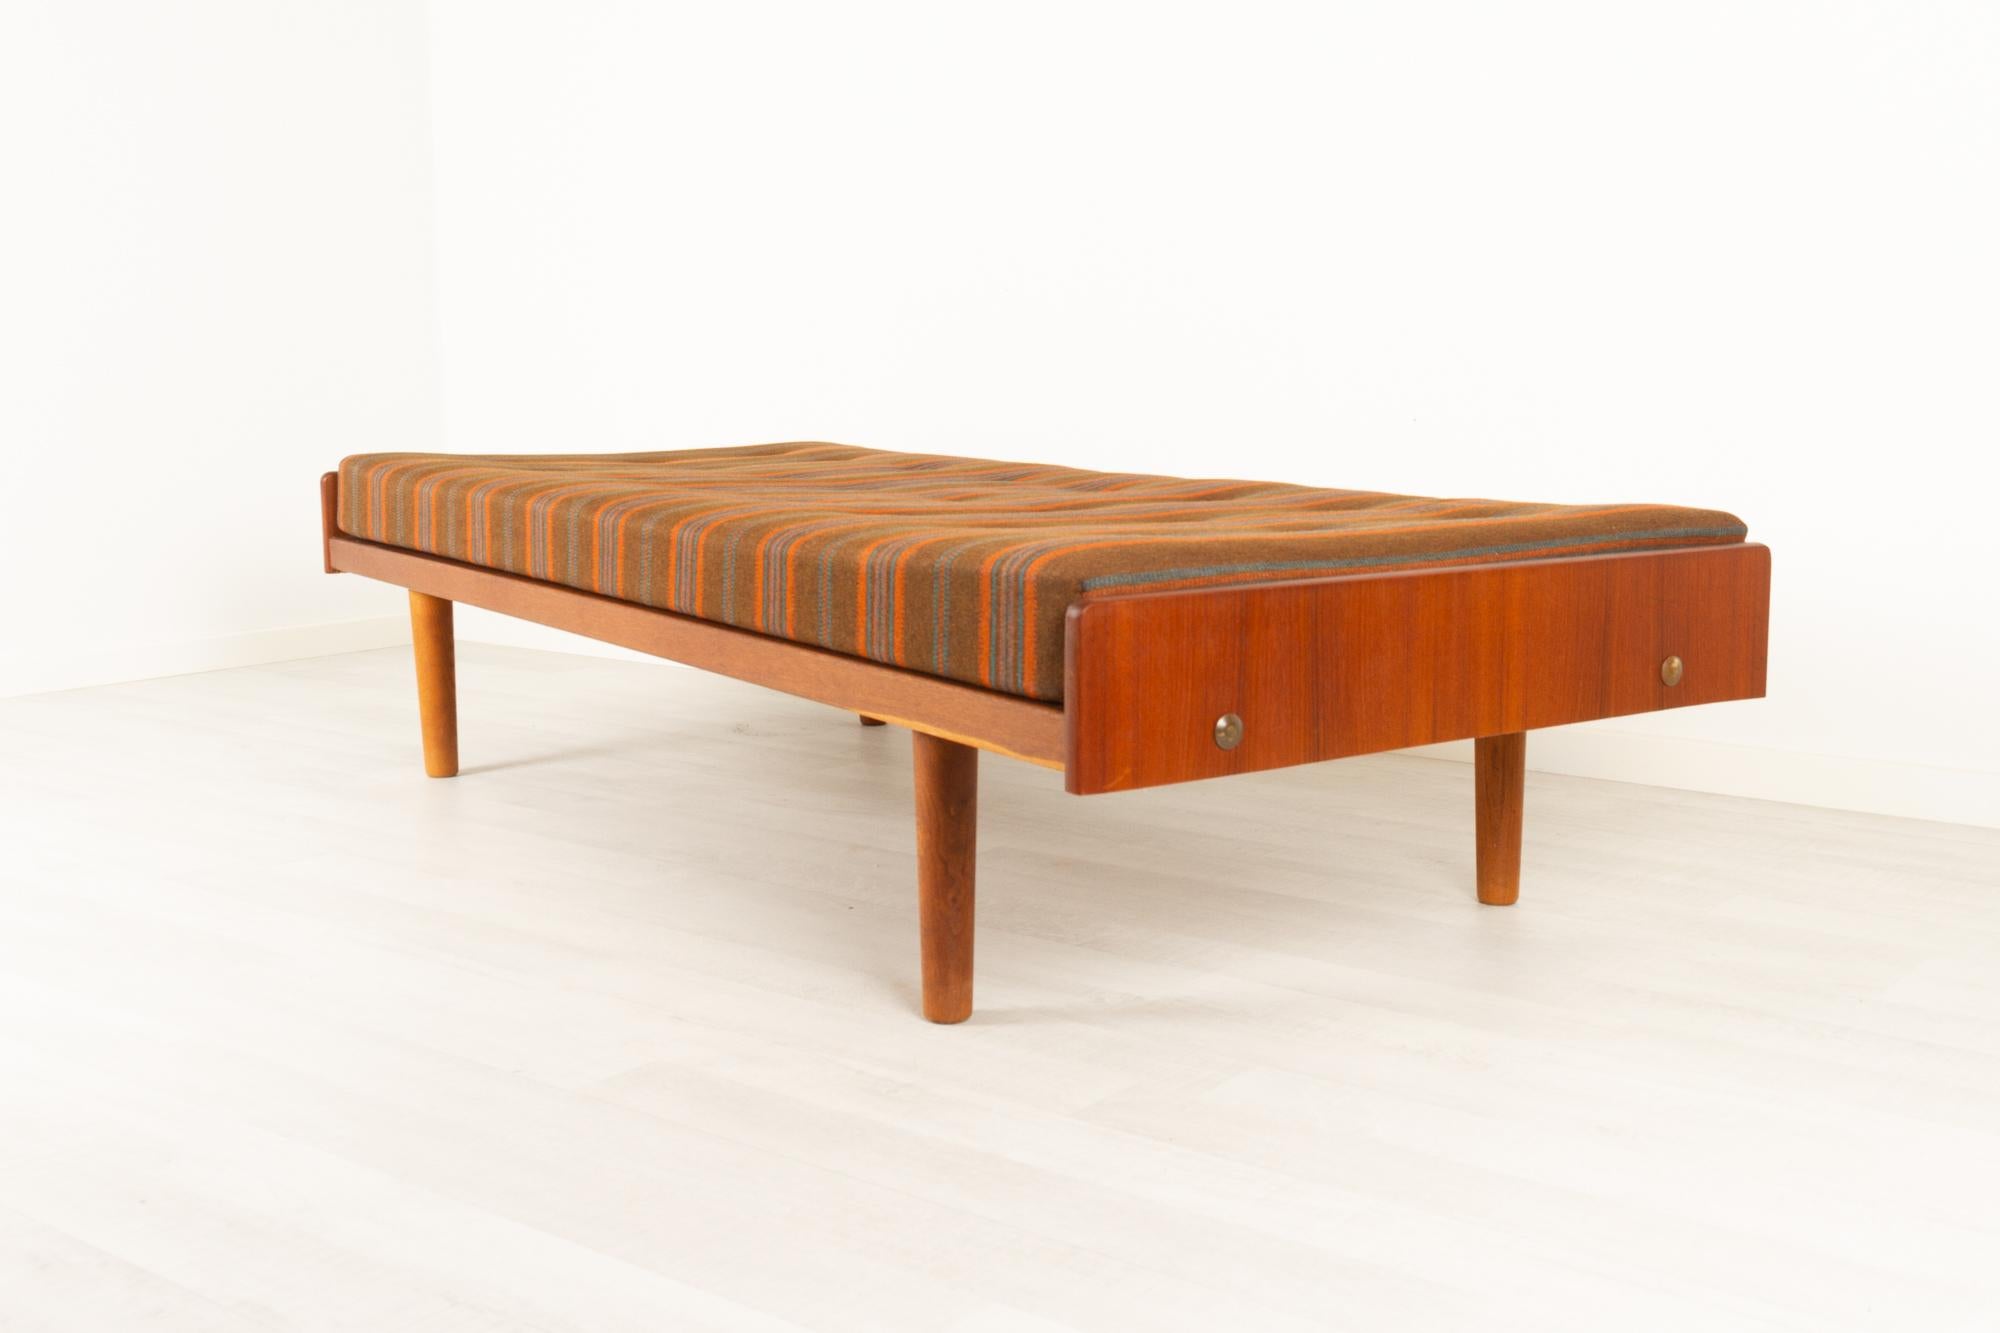 Vintage Danish teak daybed by Ejvind A. Johansson for FDB Møbler, 1960s
Danish modern daybed with original striped spring mattress. Head- and footboard in teak veneer. Frame and round tapered legs in solid oak. Slats in solid beech.
Original brown